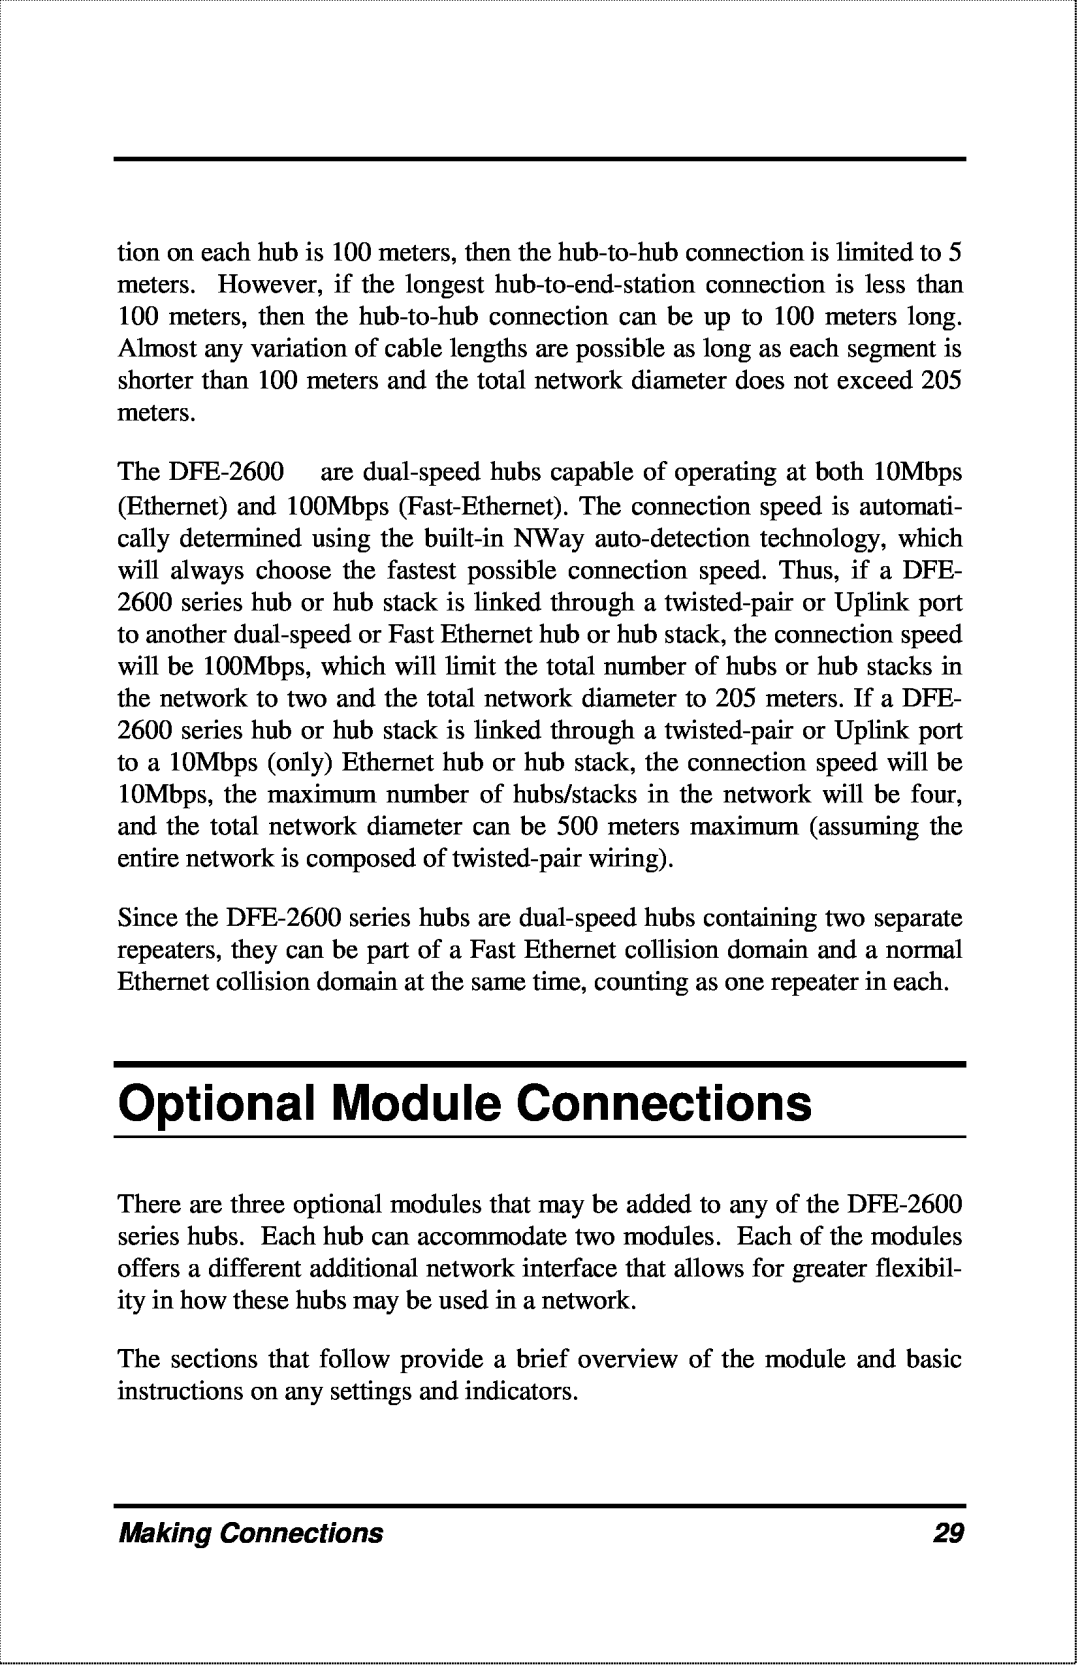 D-Link DFE-2600 manual Optional Module Connections, Making Connections 